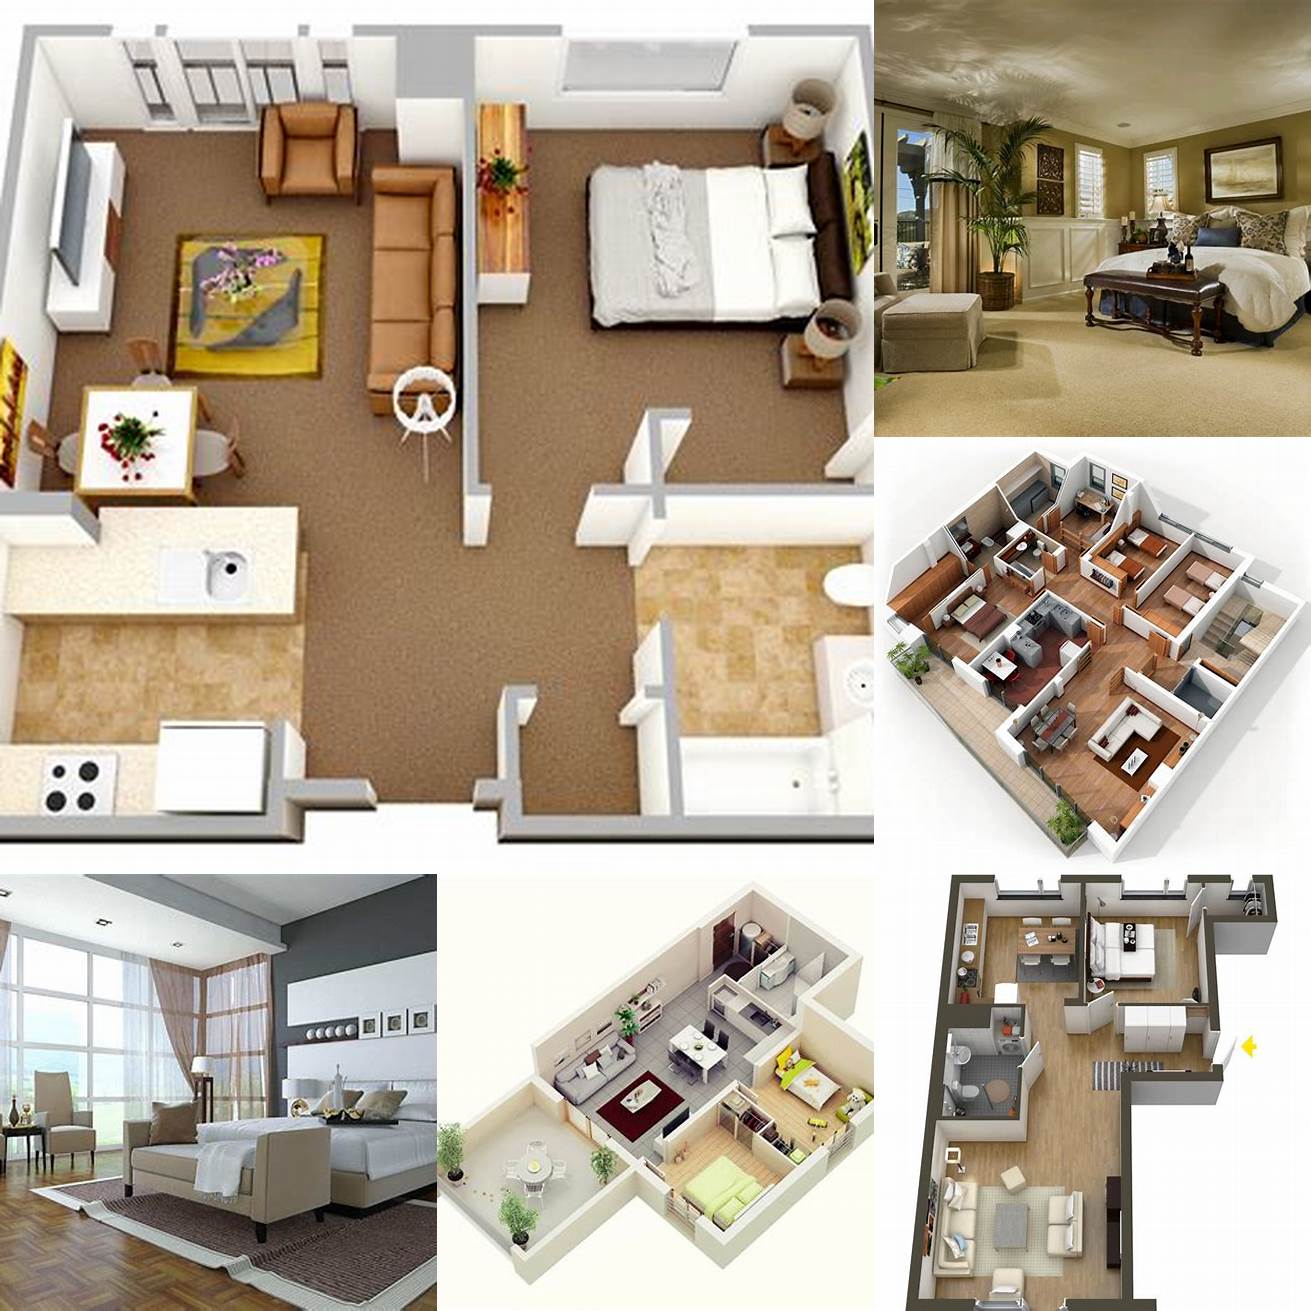 Image of a bedroom layout